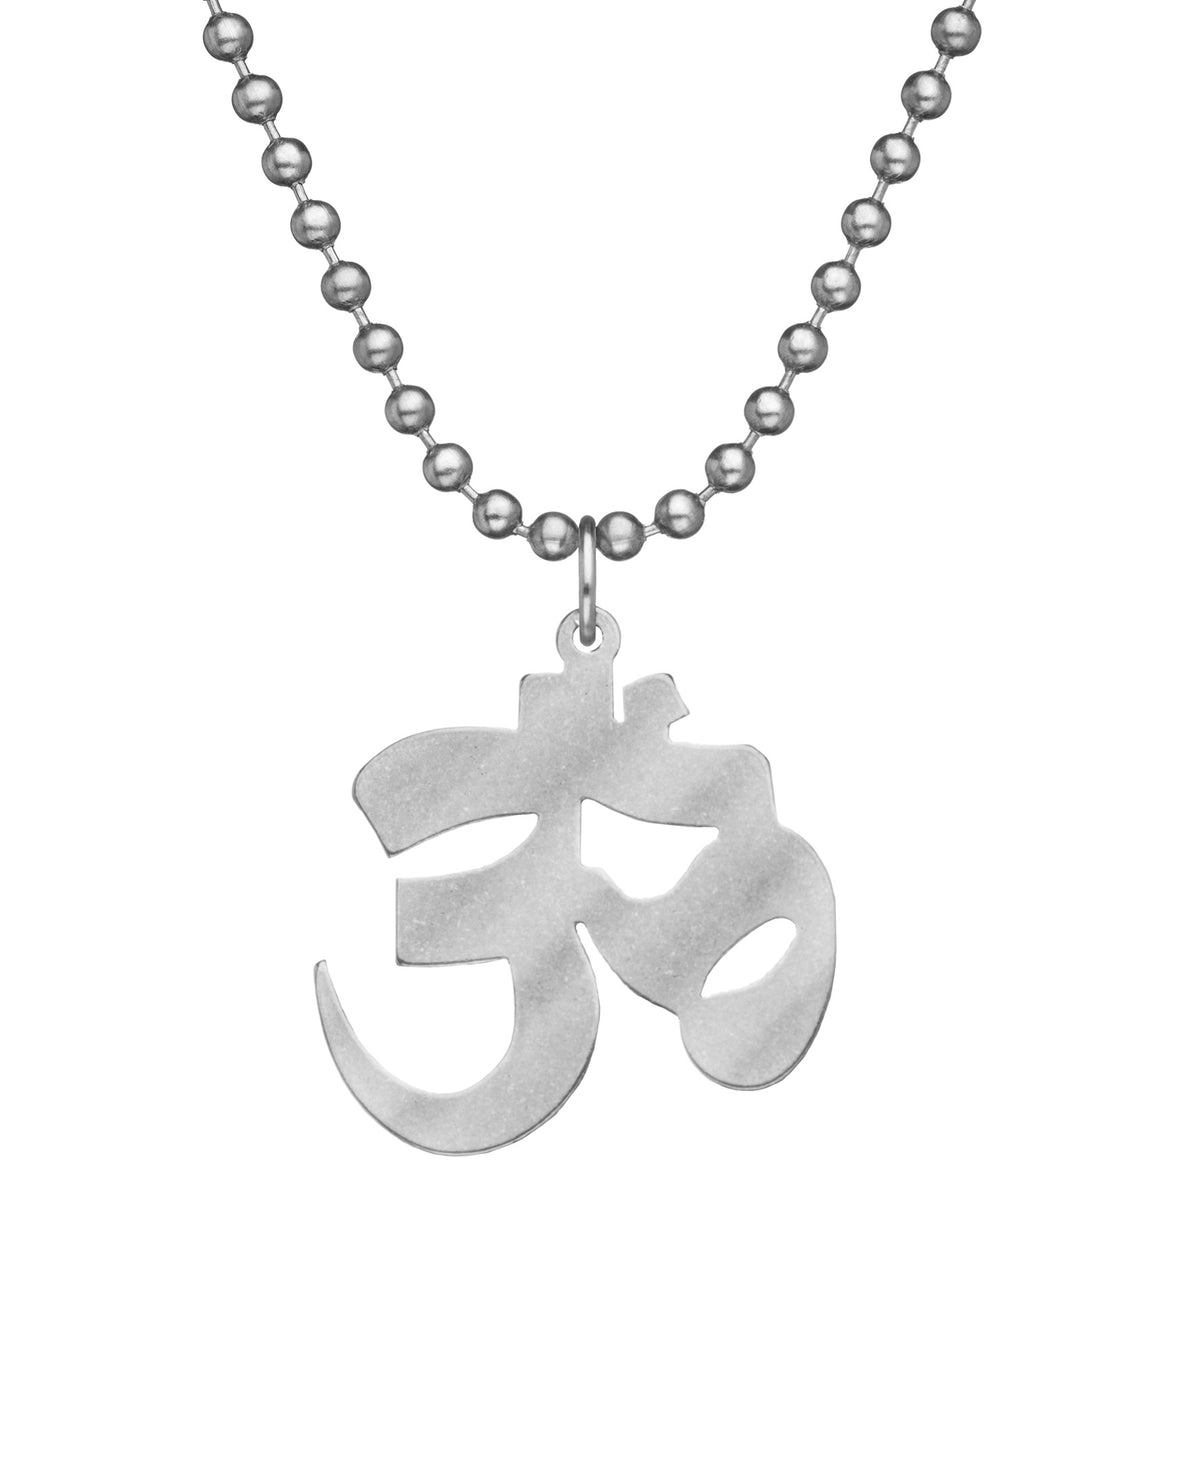 Genuine U.S. Military Issue AUM Necklace with Dog Tag Chain